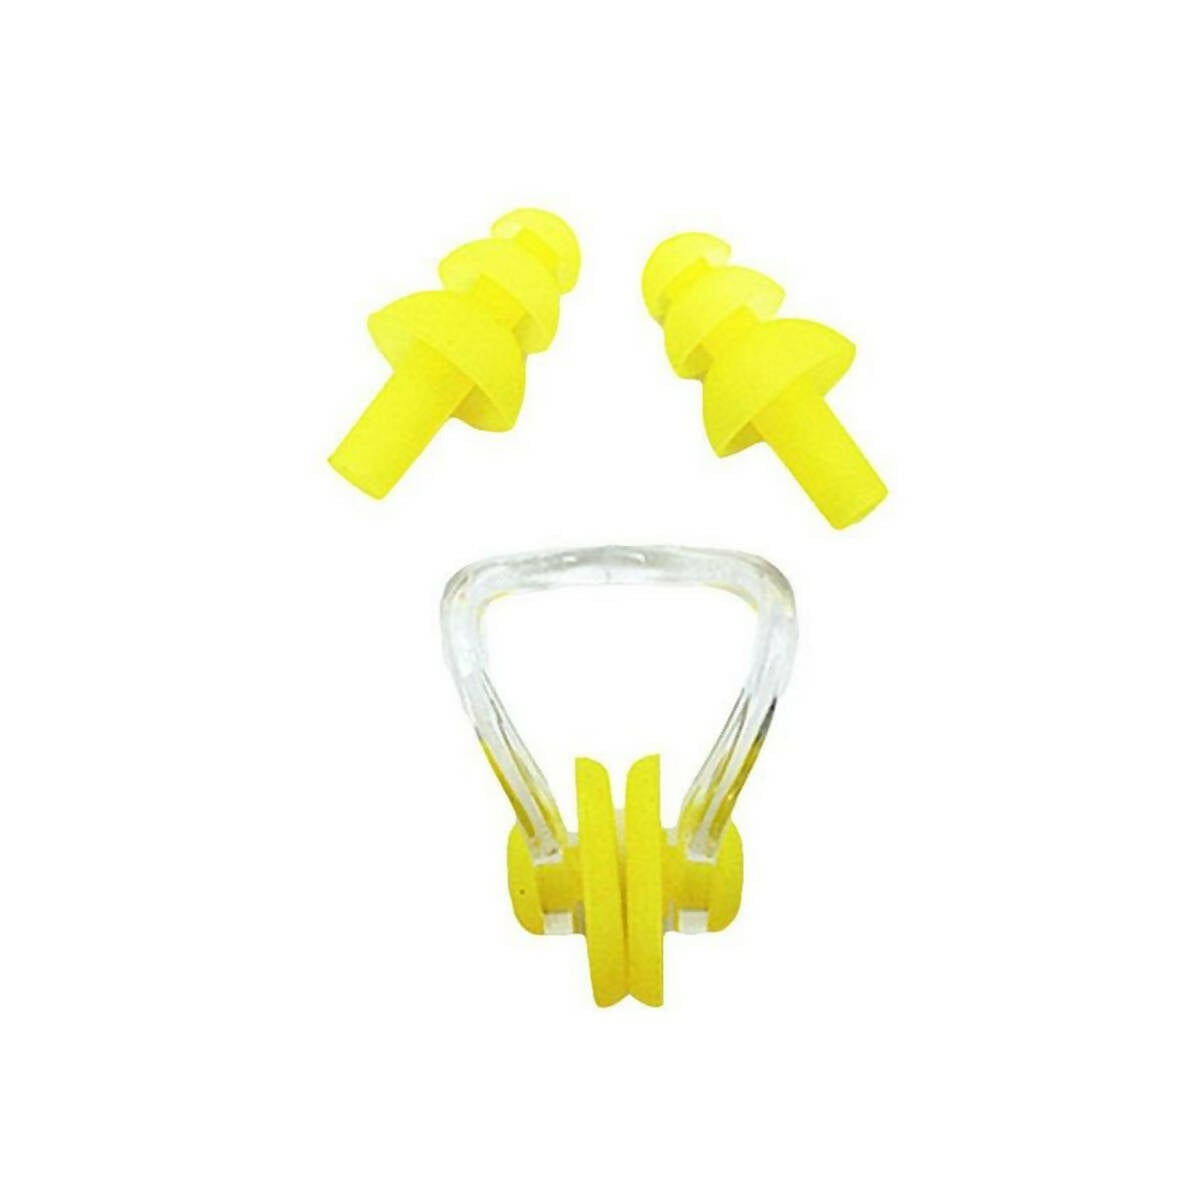 Silicone Ear Plugs & Nose Clip Set with HARD CASE - Yellow